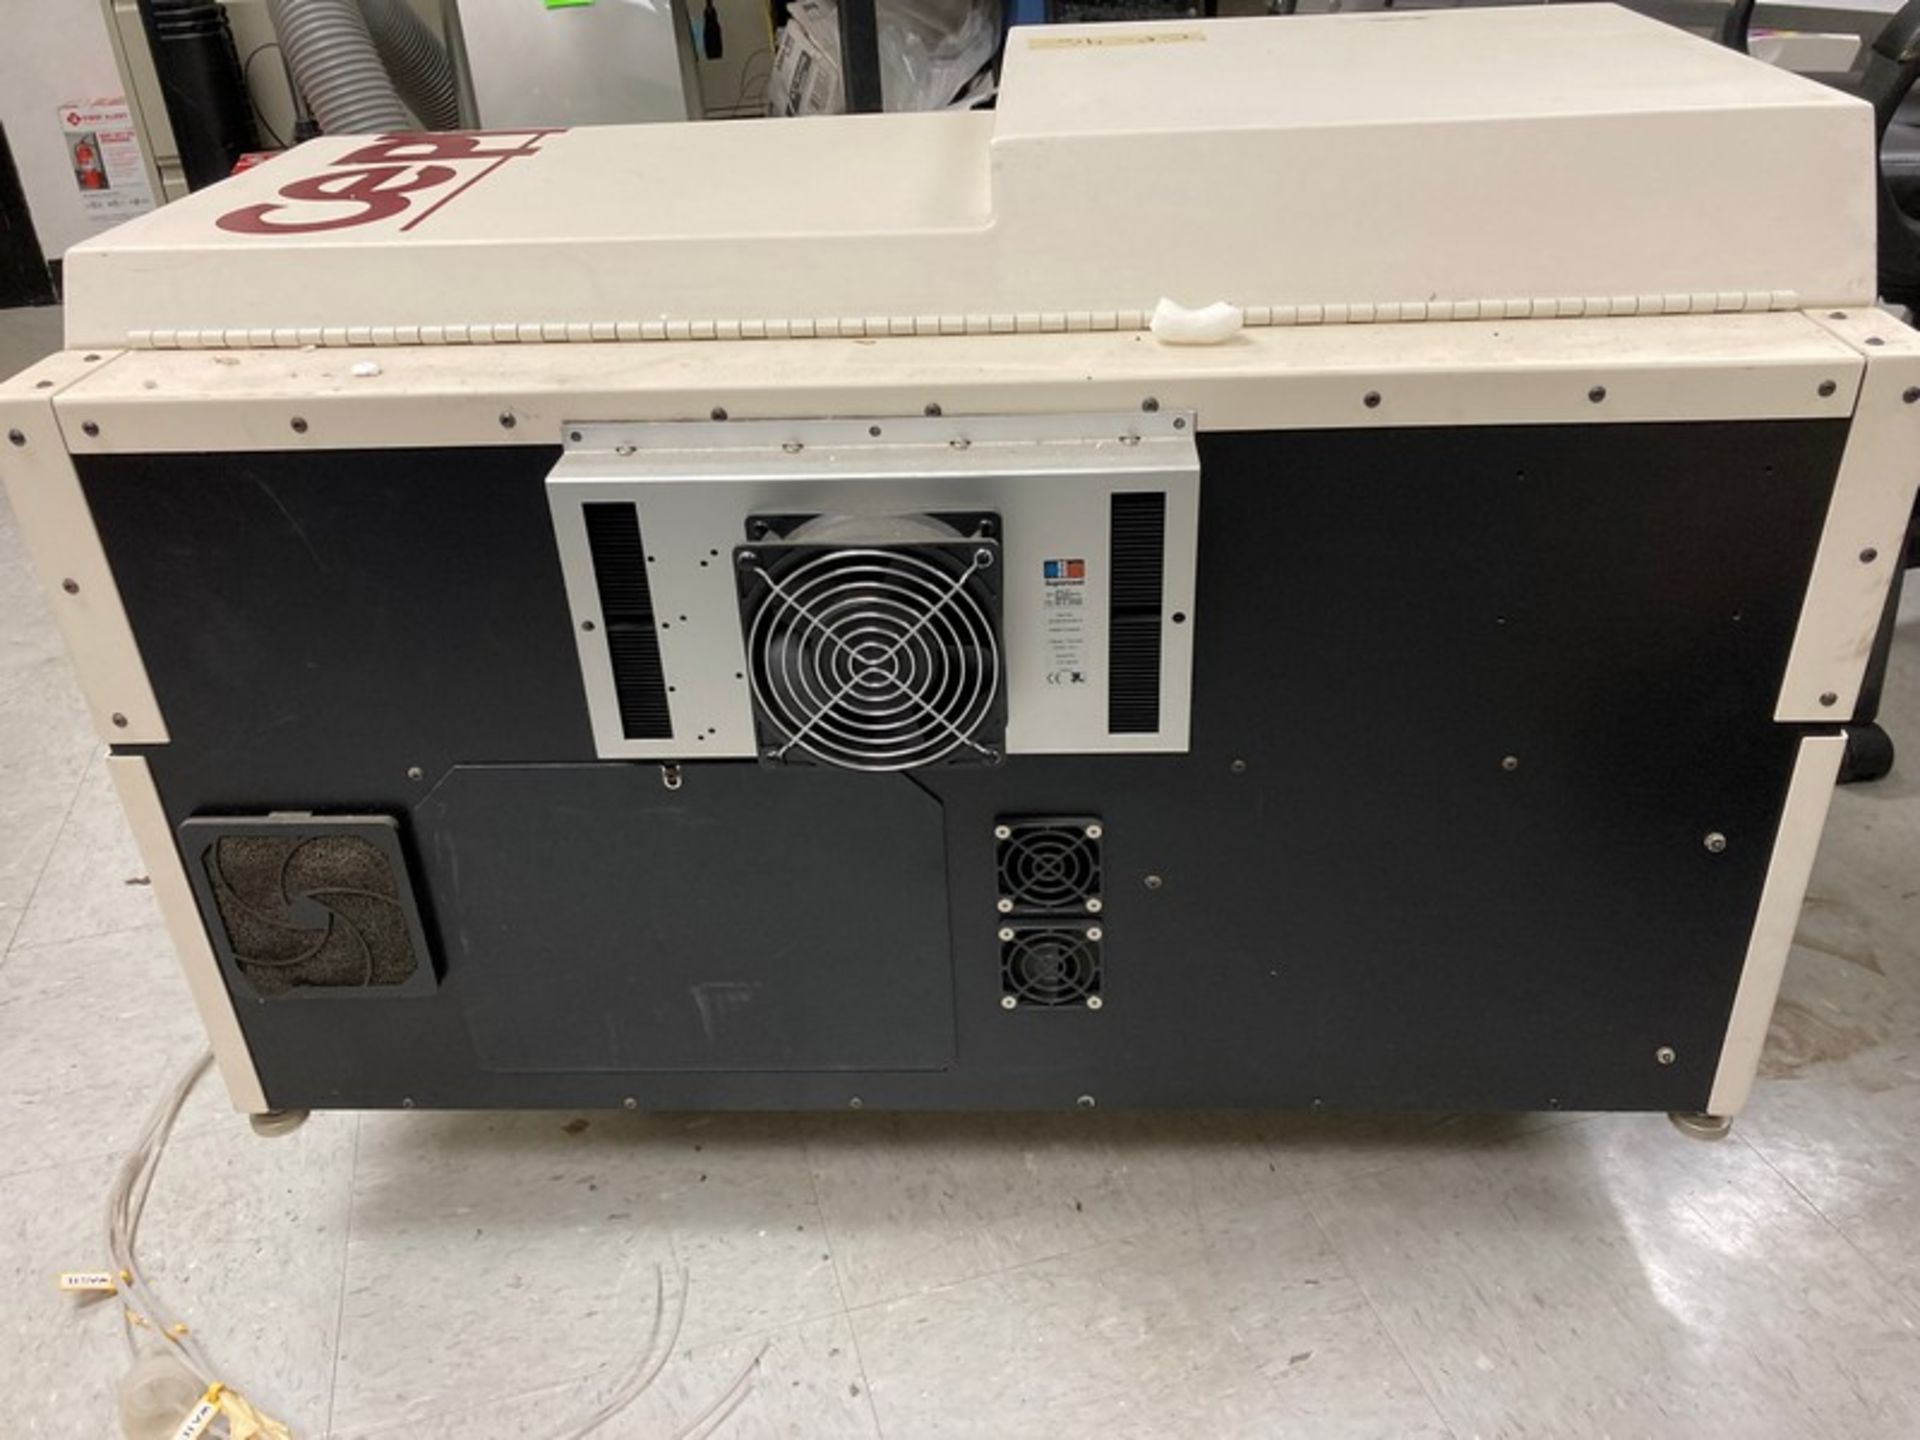 CombiSep CePRO 9600 Electrophoresis System Serial #AD603013, 120V, 5 amps, 36"Wx24.25"Dx20"H ( - Image 11 of 12